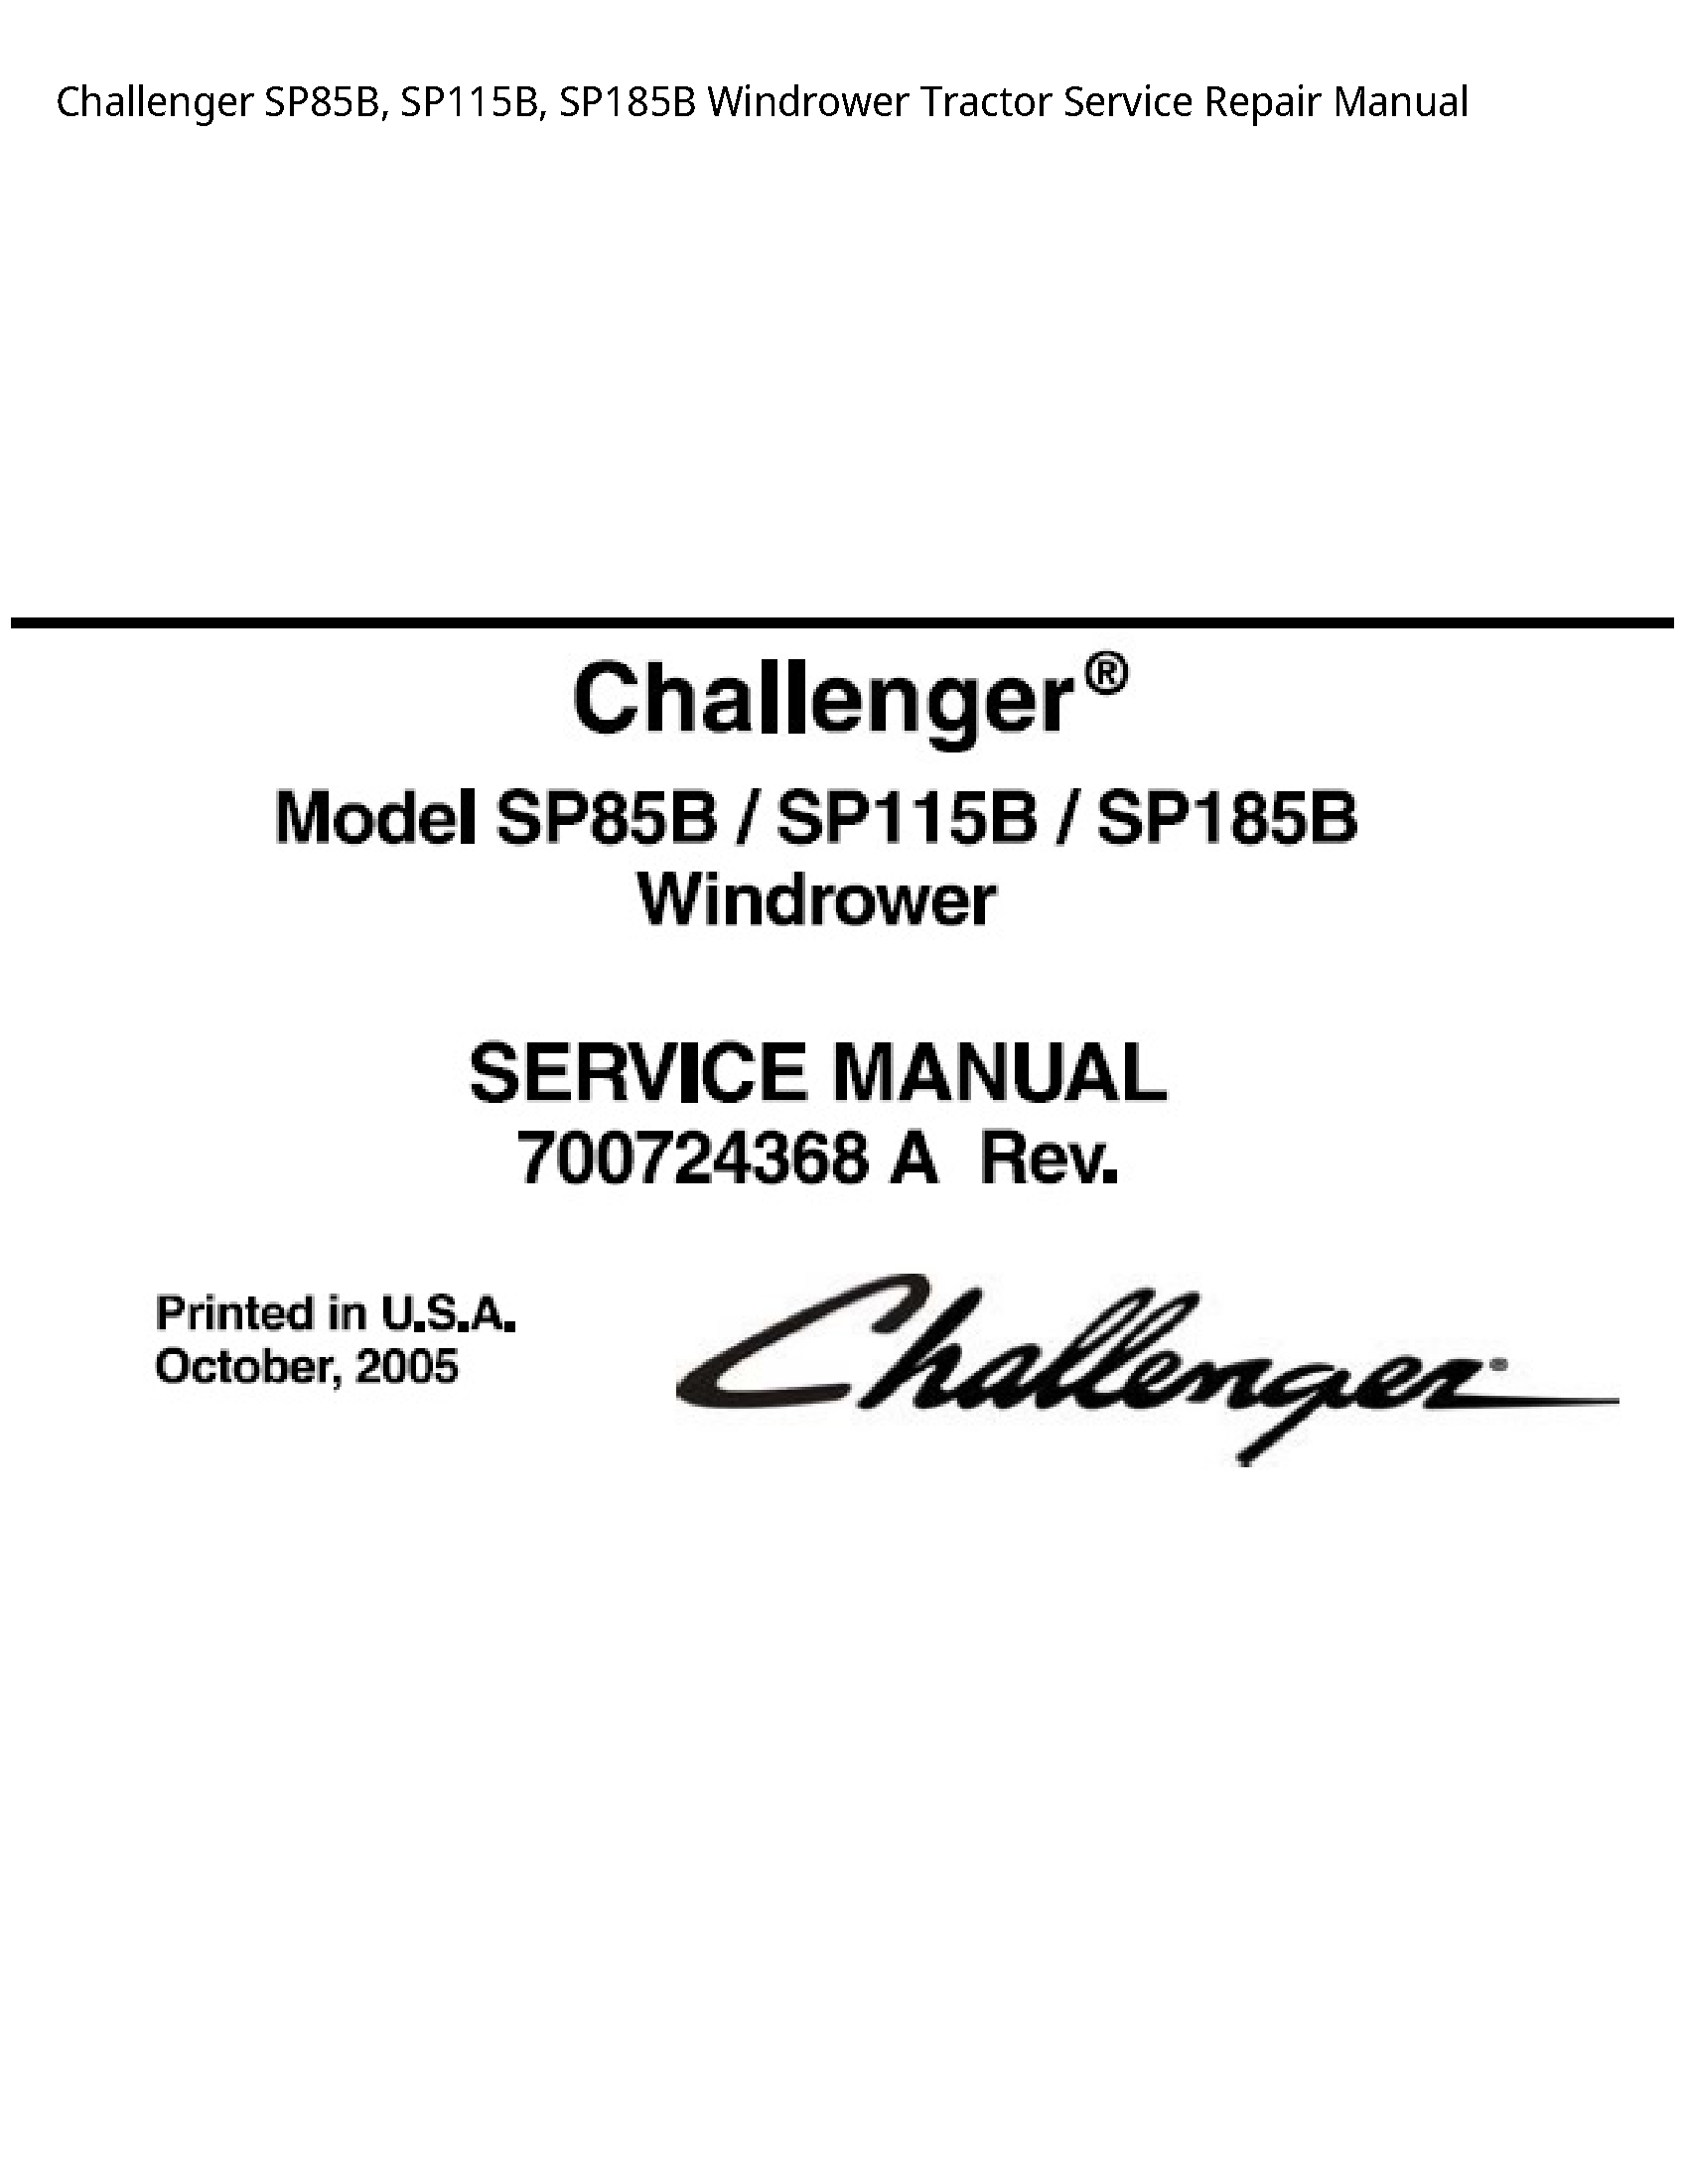 Challenger SP85B Windrower Tractor manual